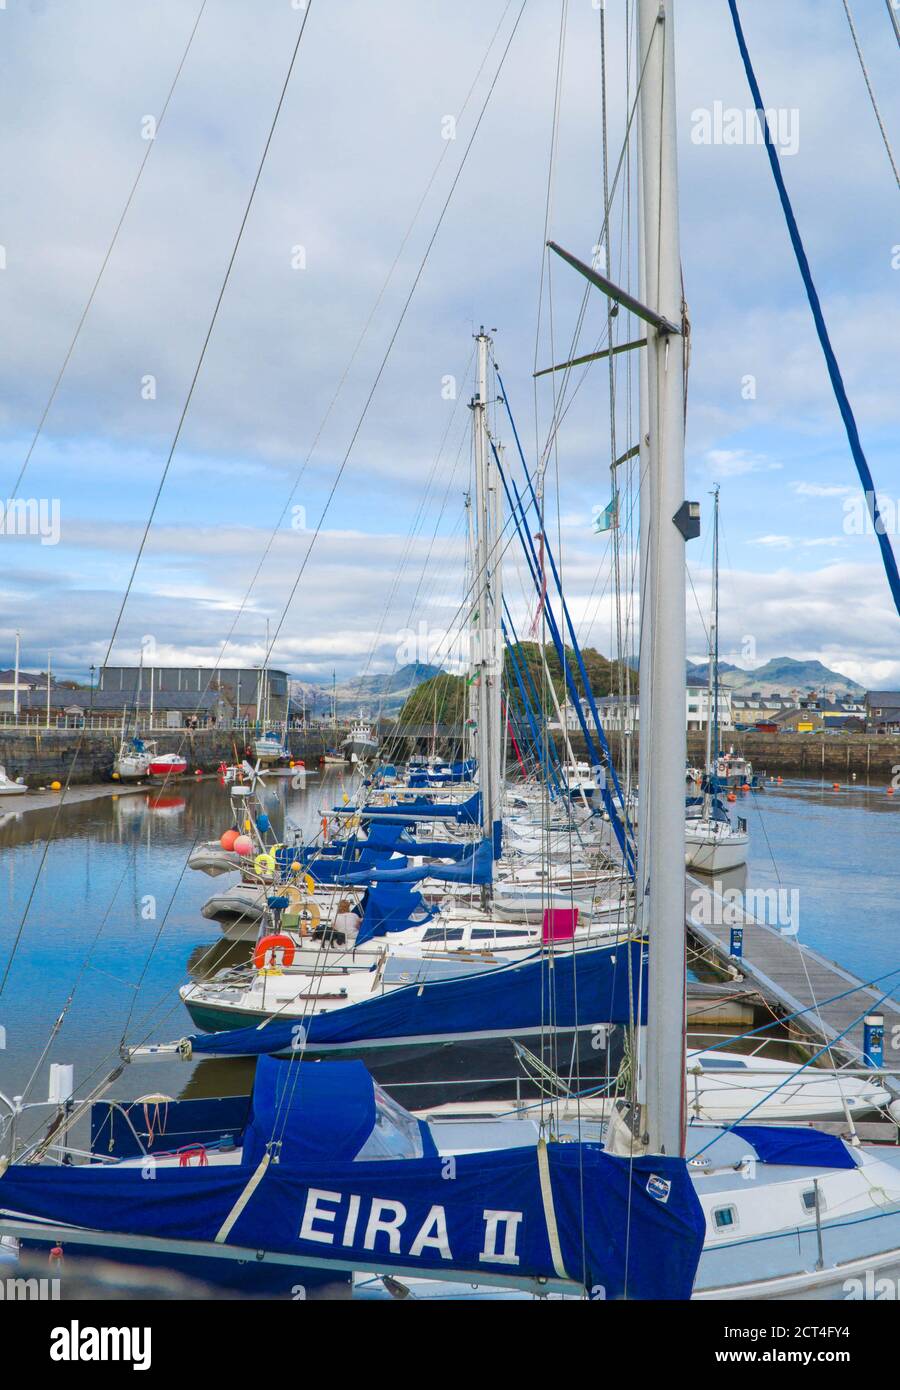 Boats moored up in Porthmadog harbour with Moelwyn Mountains in the distance, North Wales UK August 2020. Stock Photo